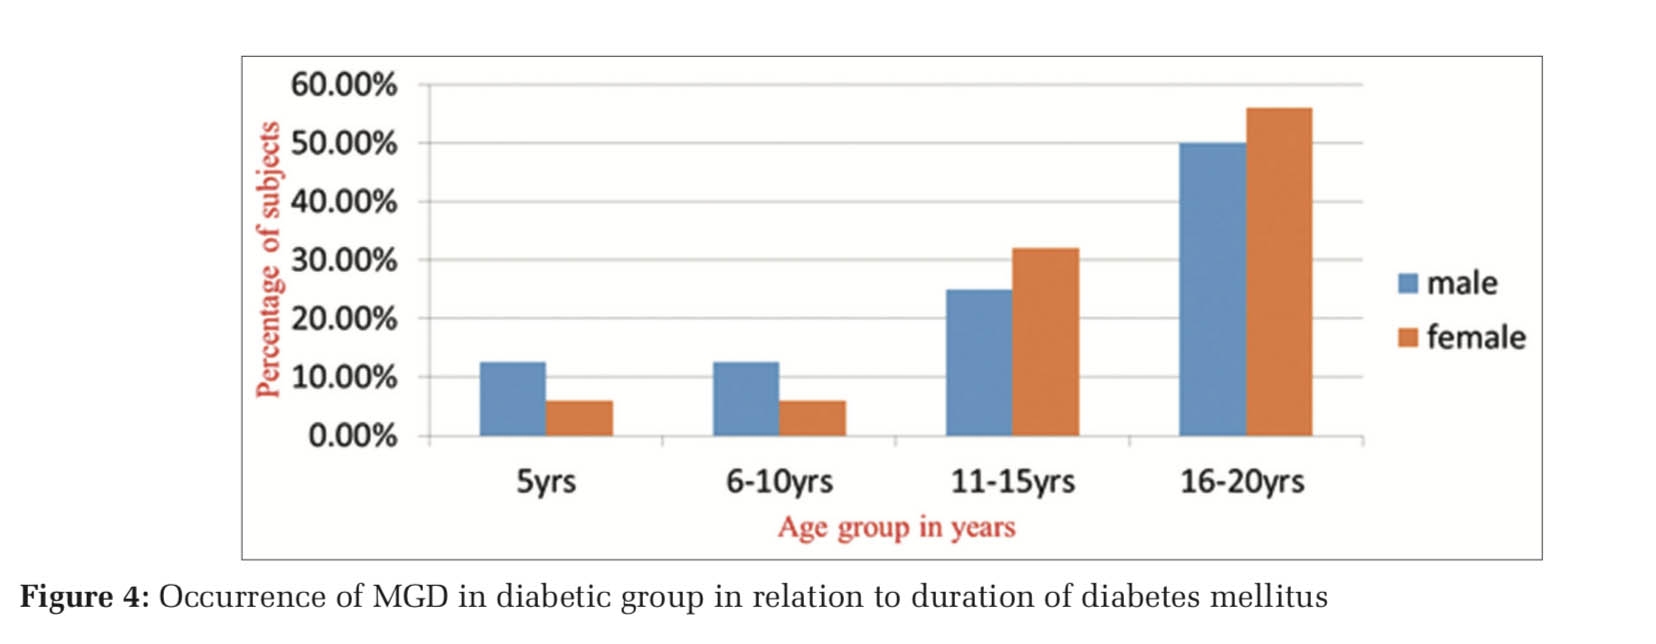 A Clinical Study on Meibomian Gland Dysfunction and Dry Eye in Patients with Type 2 Diabetes Mellitus